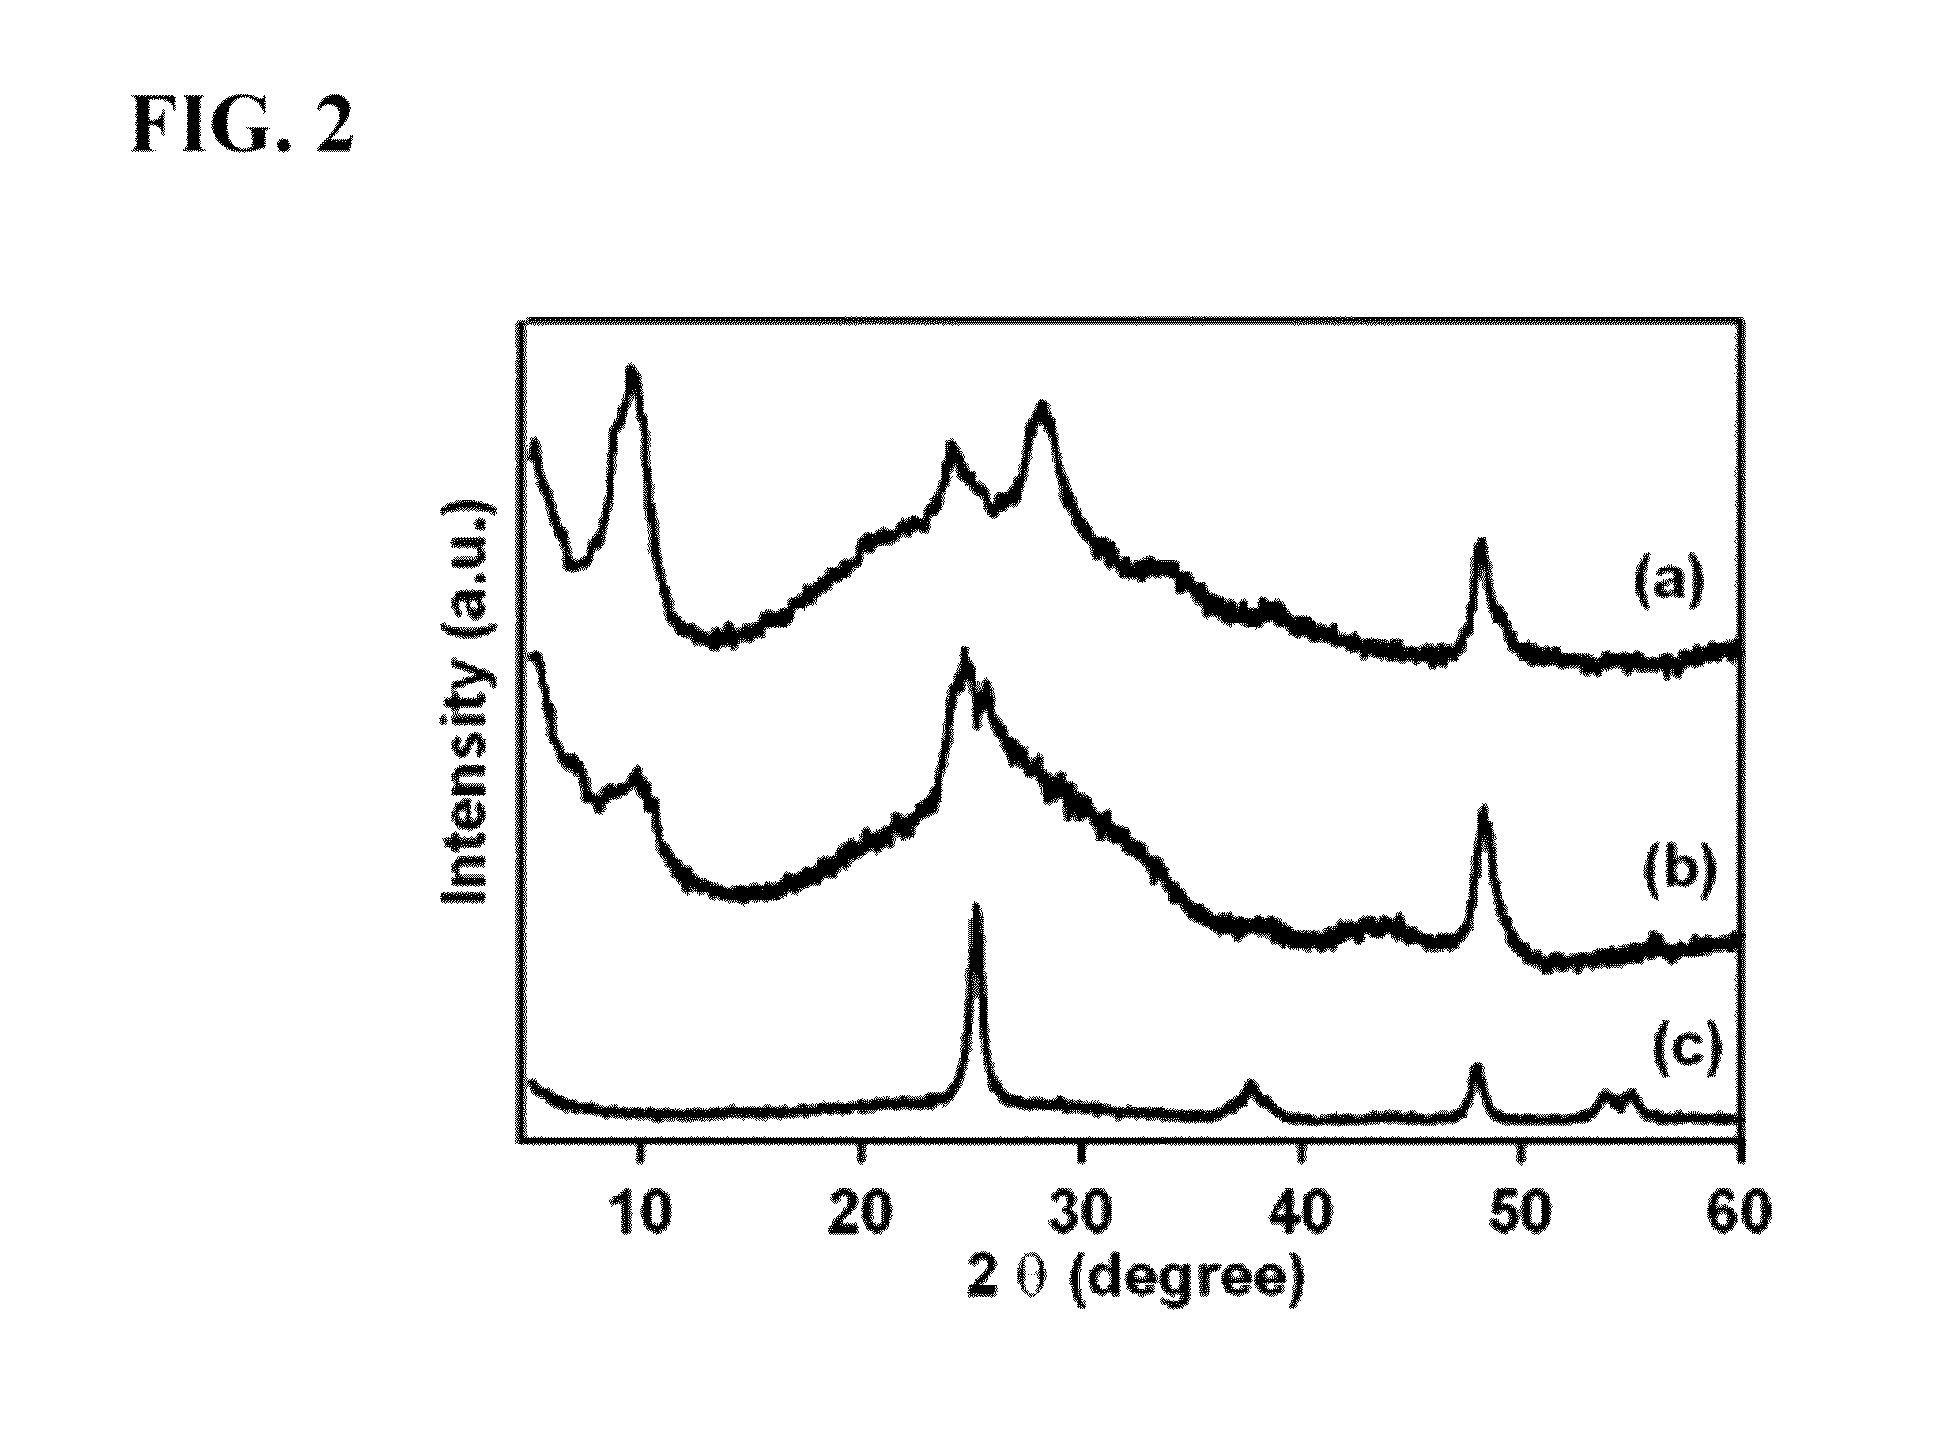 Titanate and titania nanostructures and nanostructure assemblies, and methods of making same